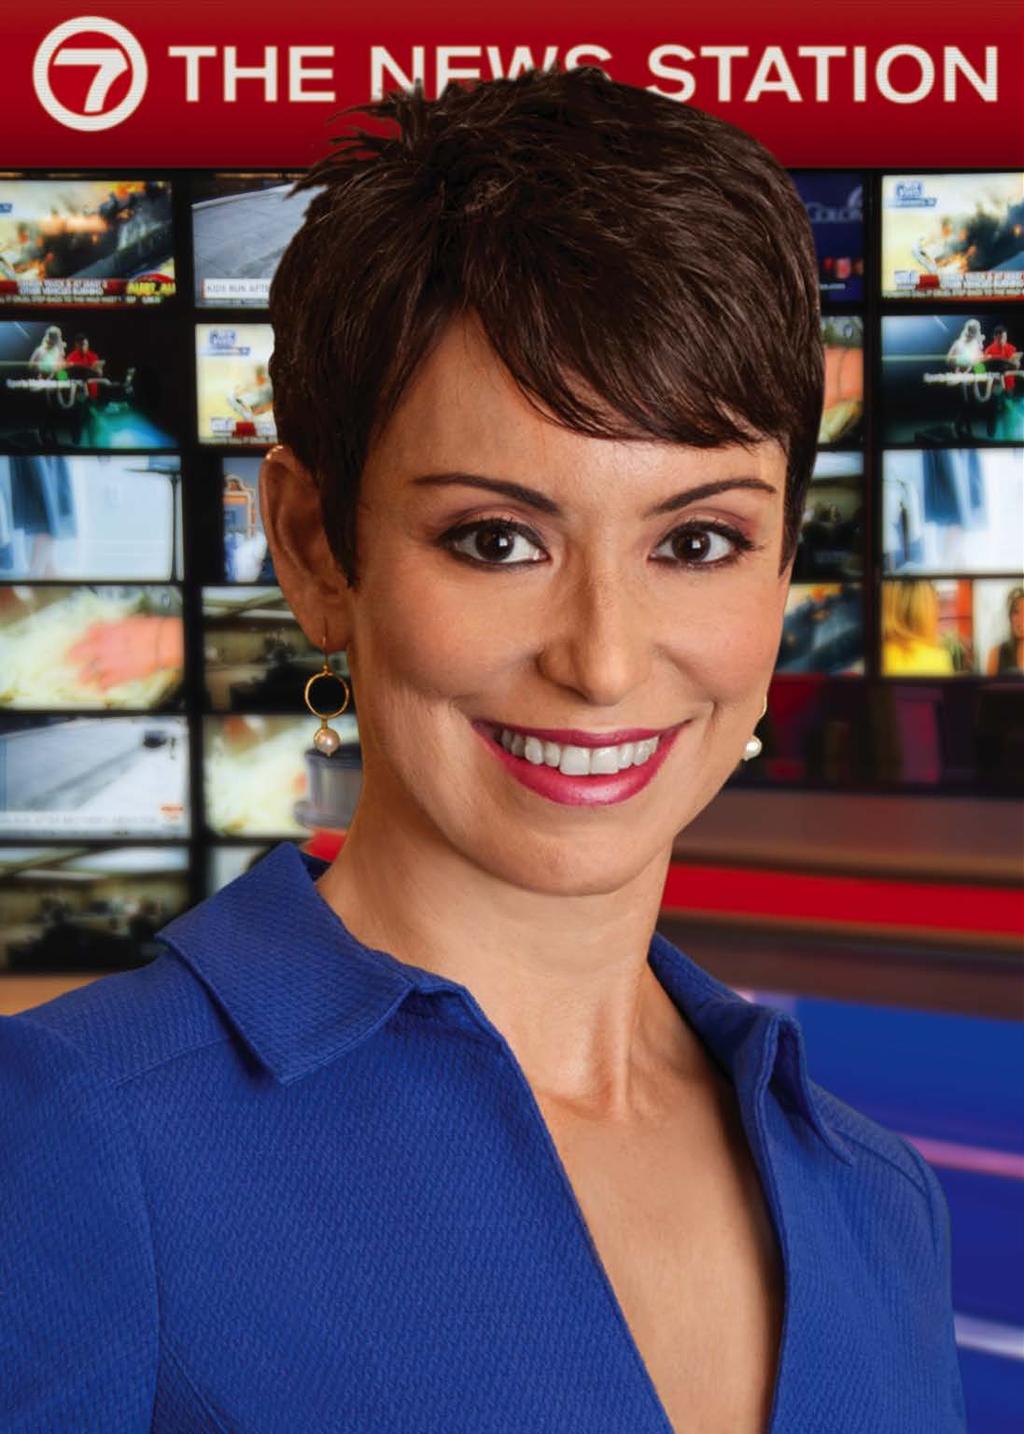 2018 Honoree BELKYS NEREY Lead Television Anchor for WSVN 7 Fox News. Five-time Emmy Award Winning Television Journalist. Currently hosts her own cooking segment Bite with Belkys.